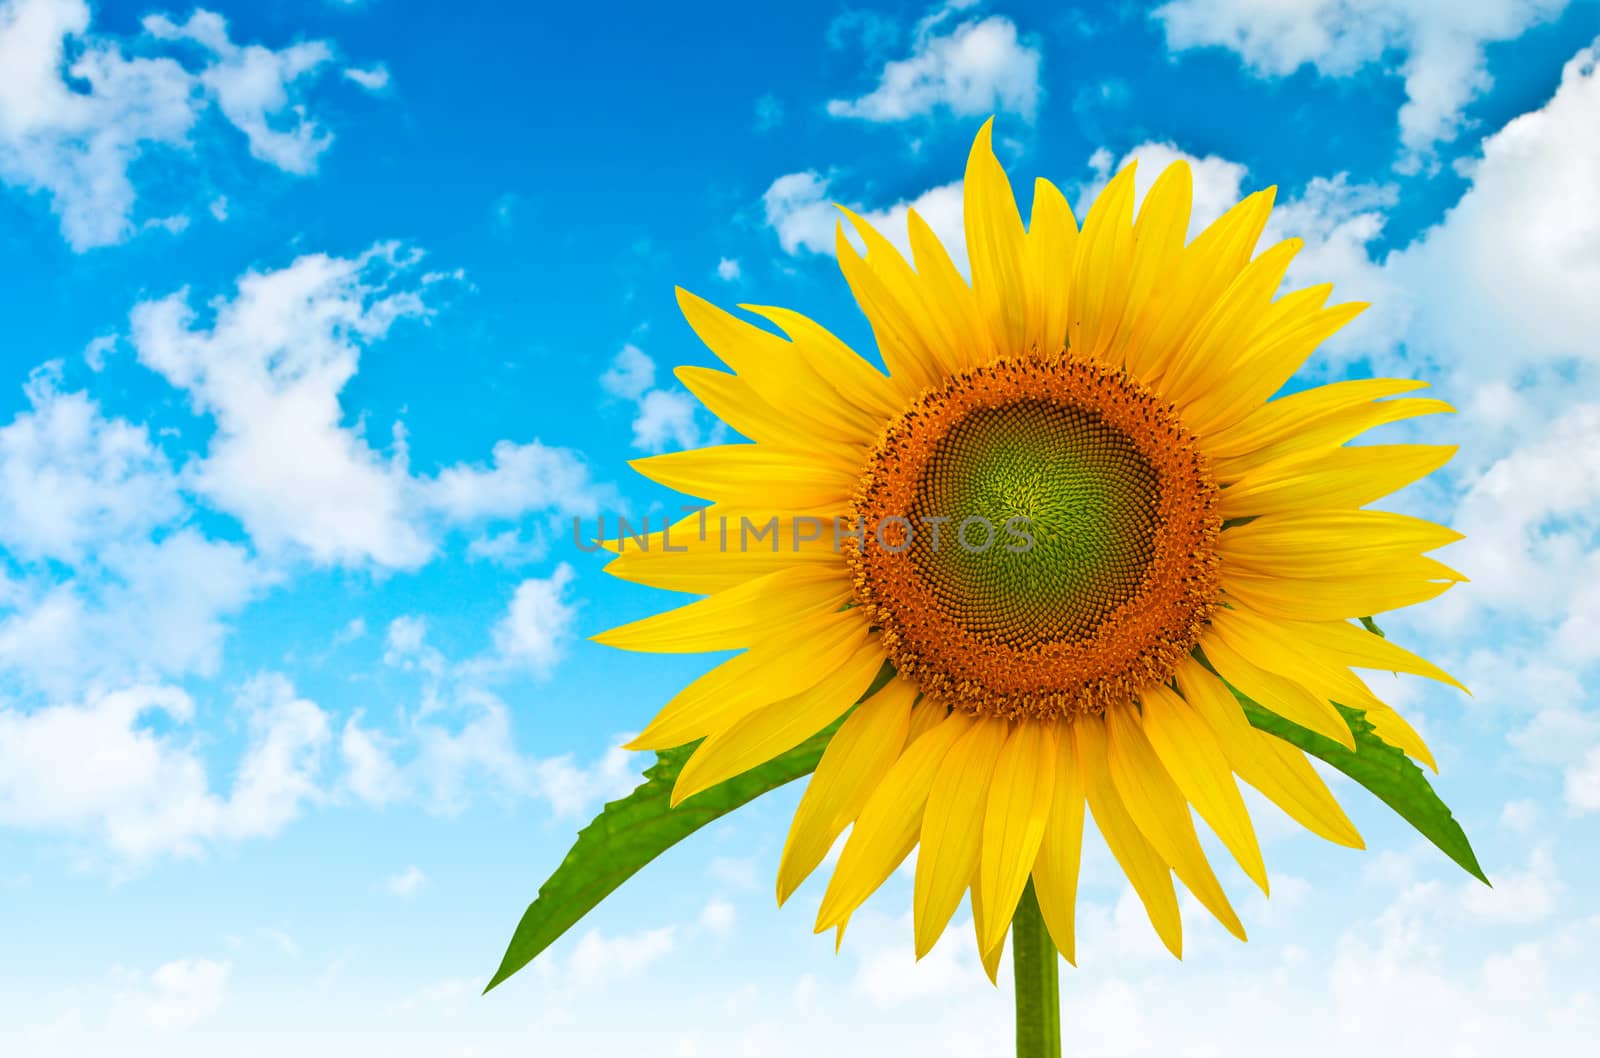 sunflower on a background of blue cloudy sky by mihalec